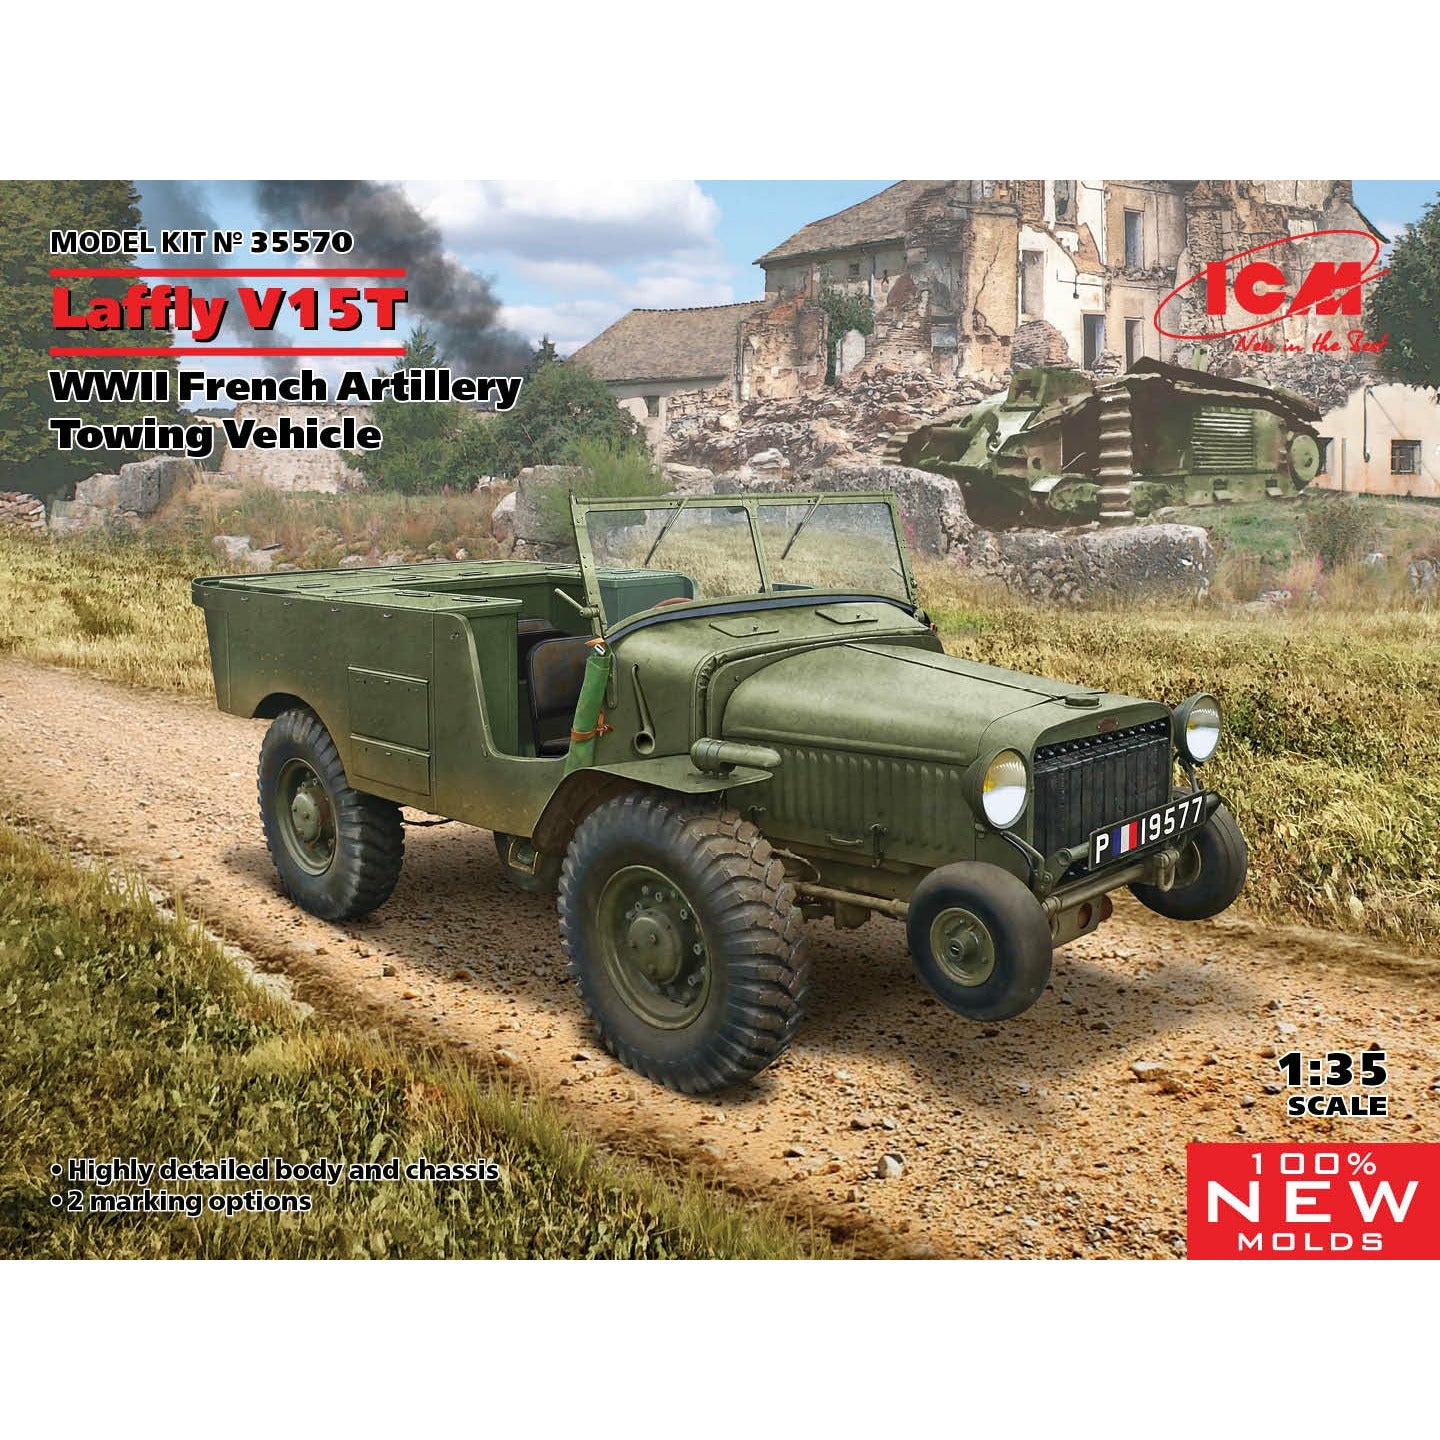 Laffly V15T, WWII French Artillery Towing Vehicle (100% new molds) 1/35 #35570 by ICM